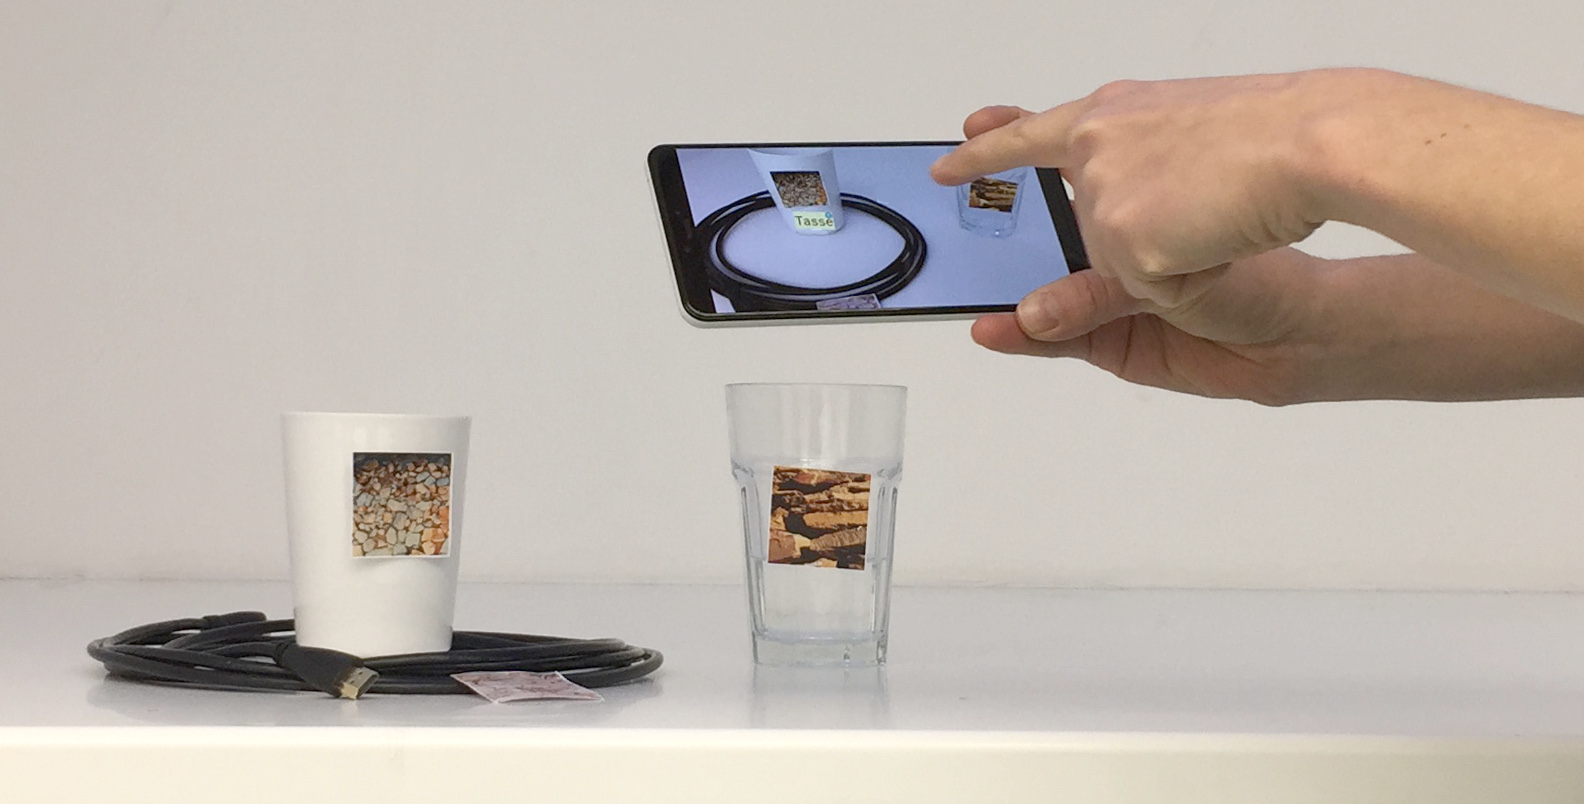 Augmented Reality to Enable Users in Learning Case Grammar from Their Real-World Interactions